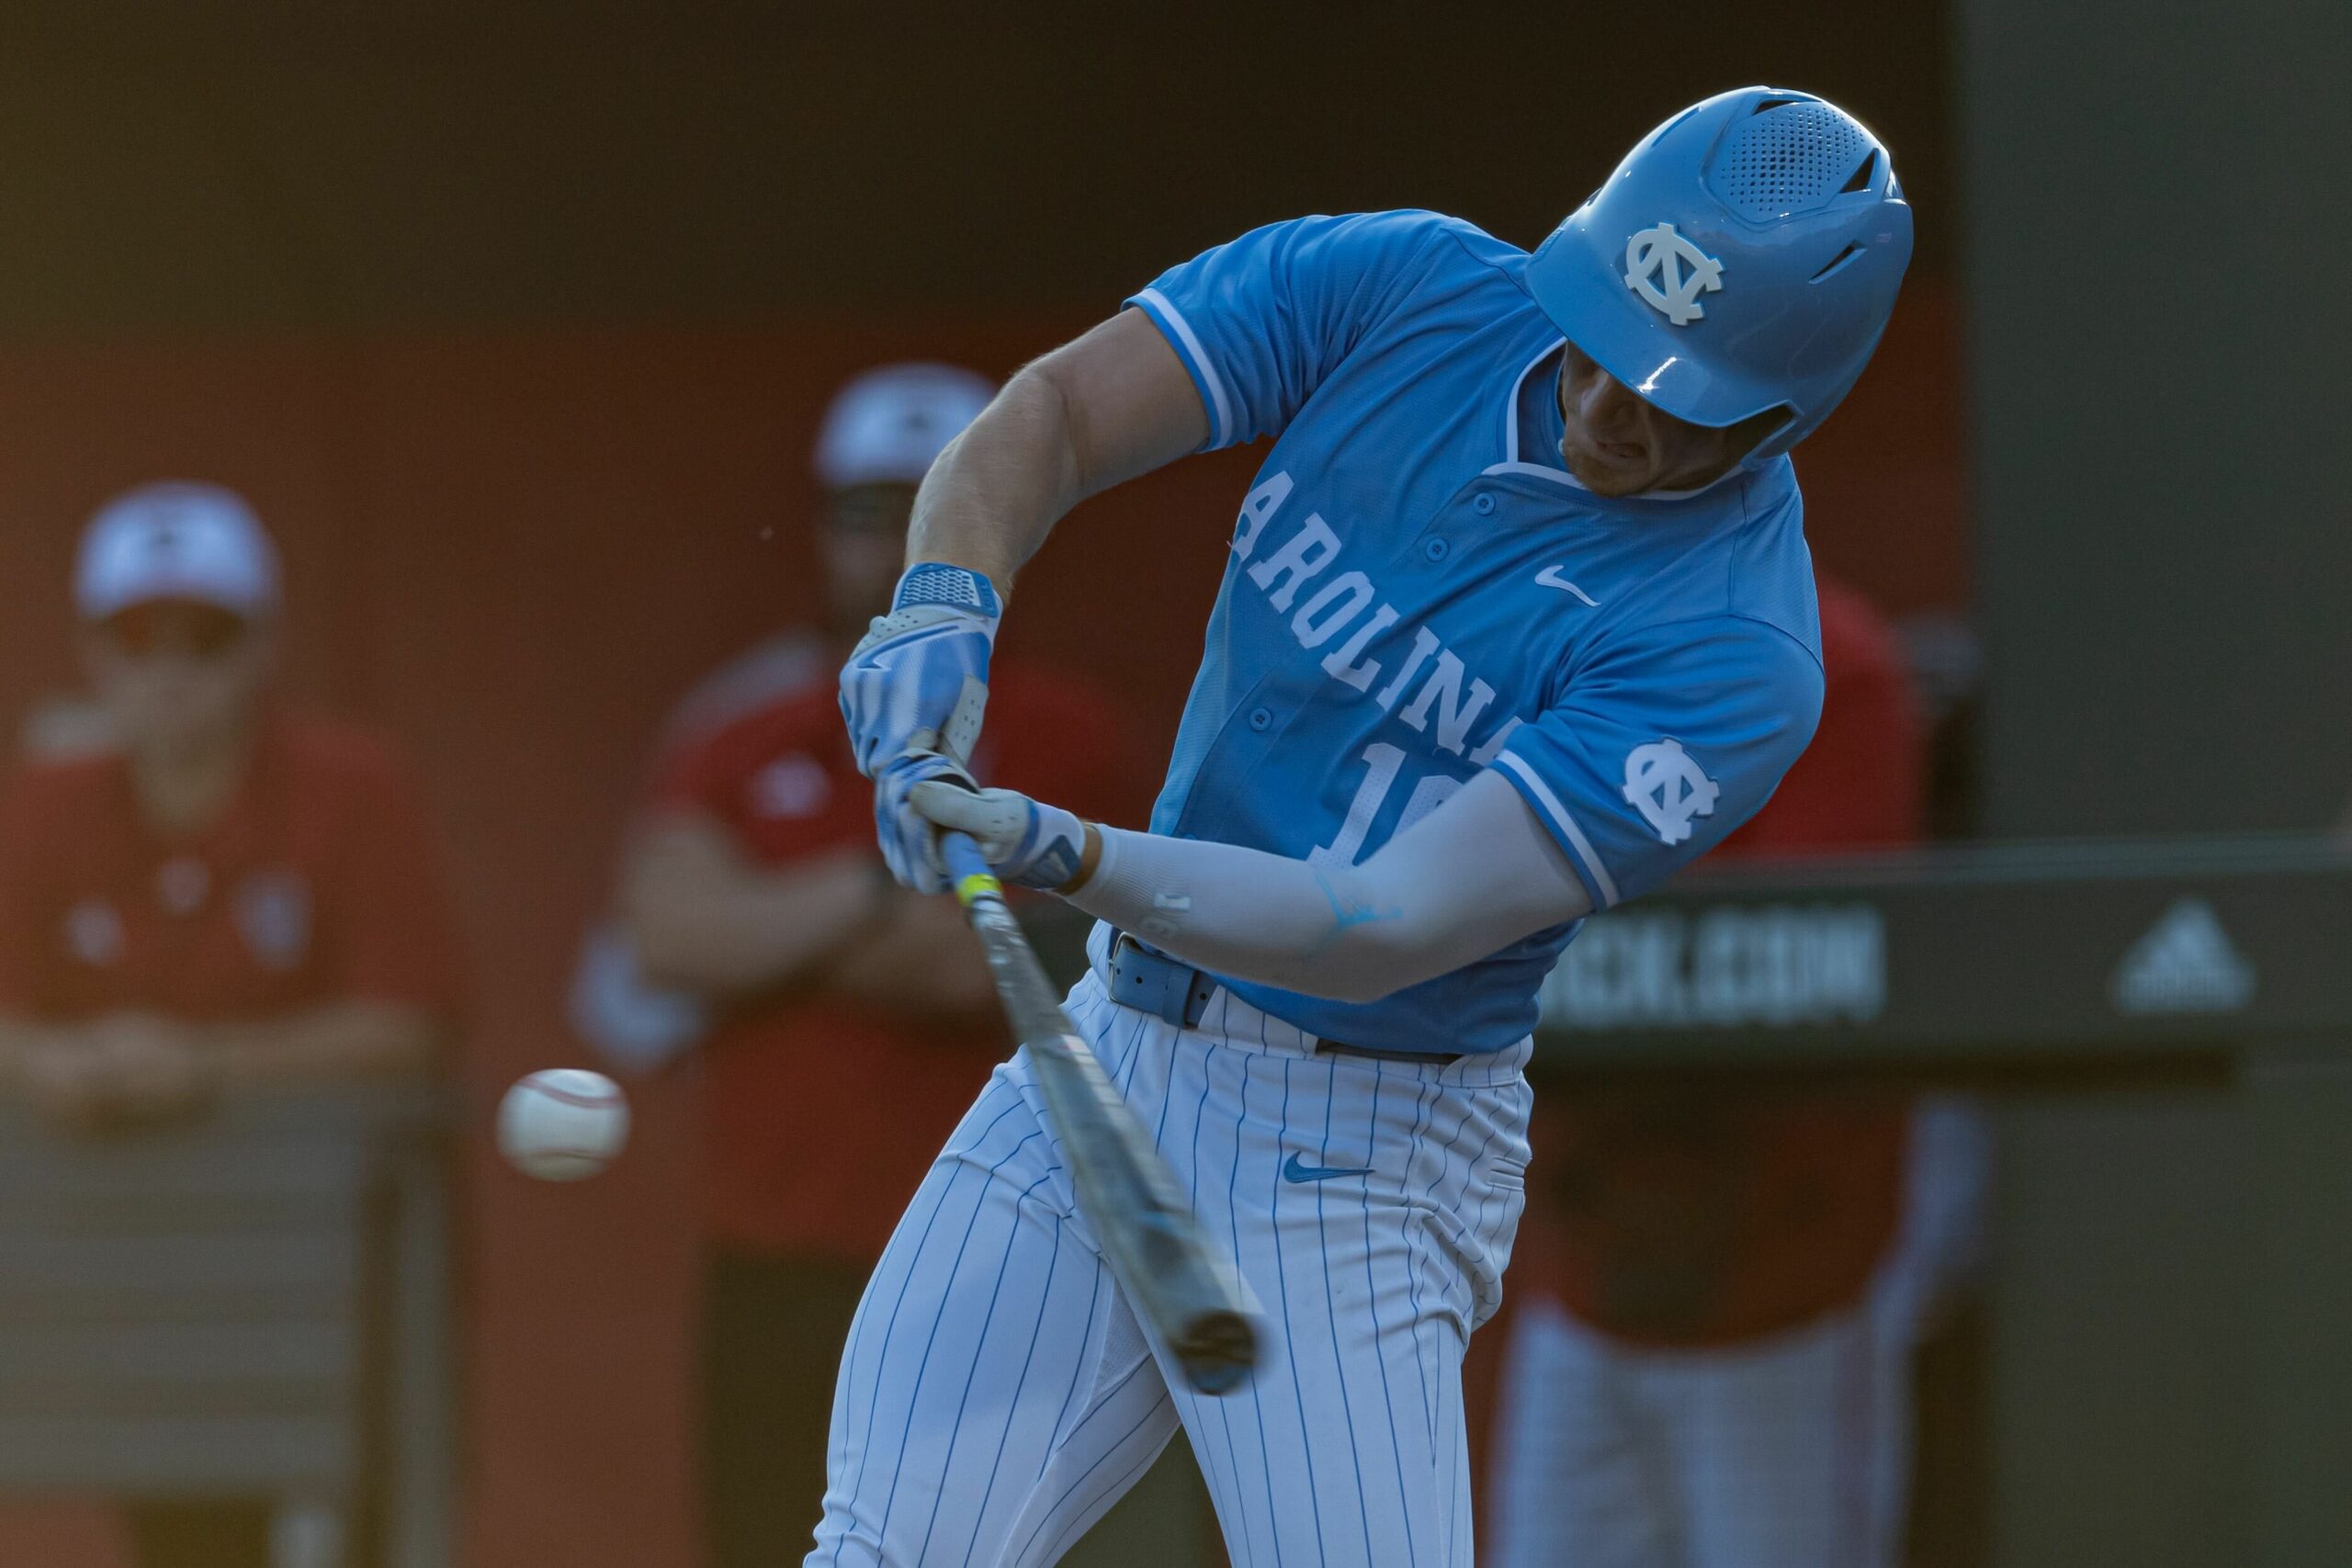 UNC Baseball belts five home runs, but NC State walks off with biggest